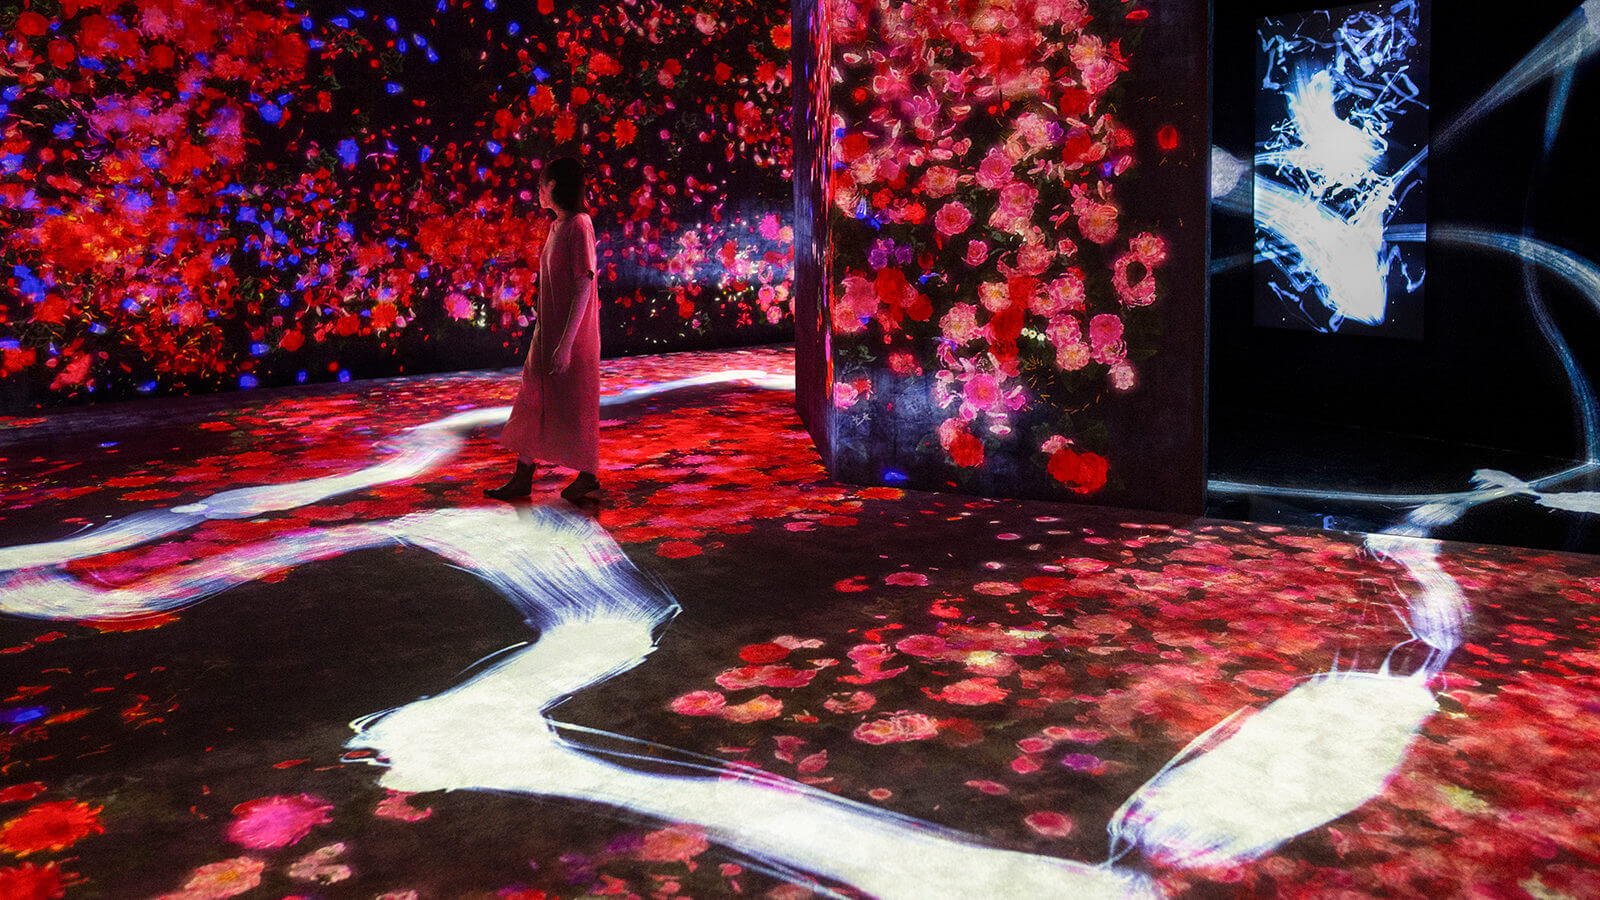 A woman walking among projected red petals